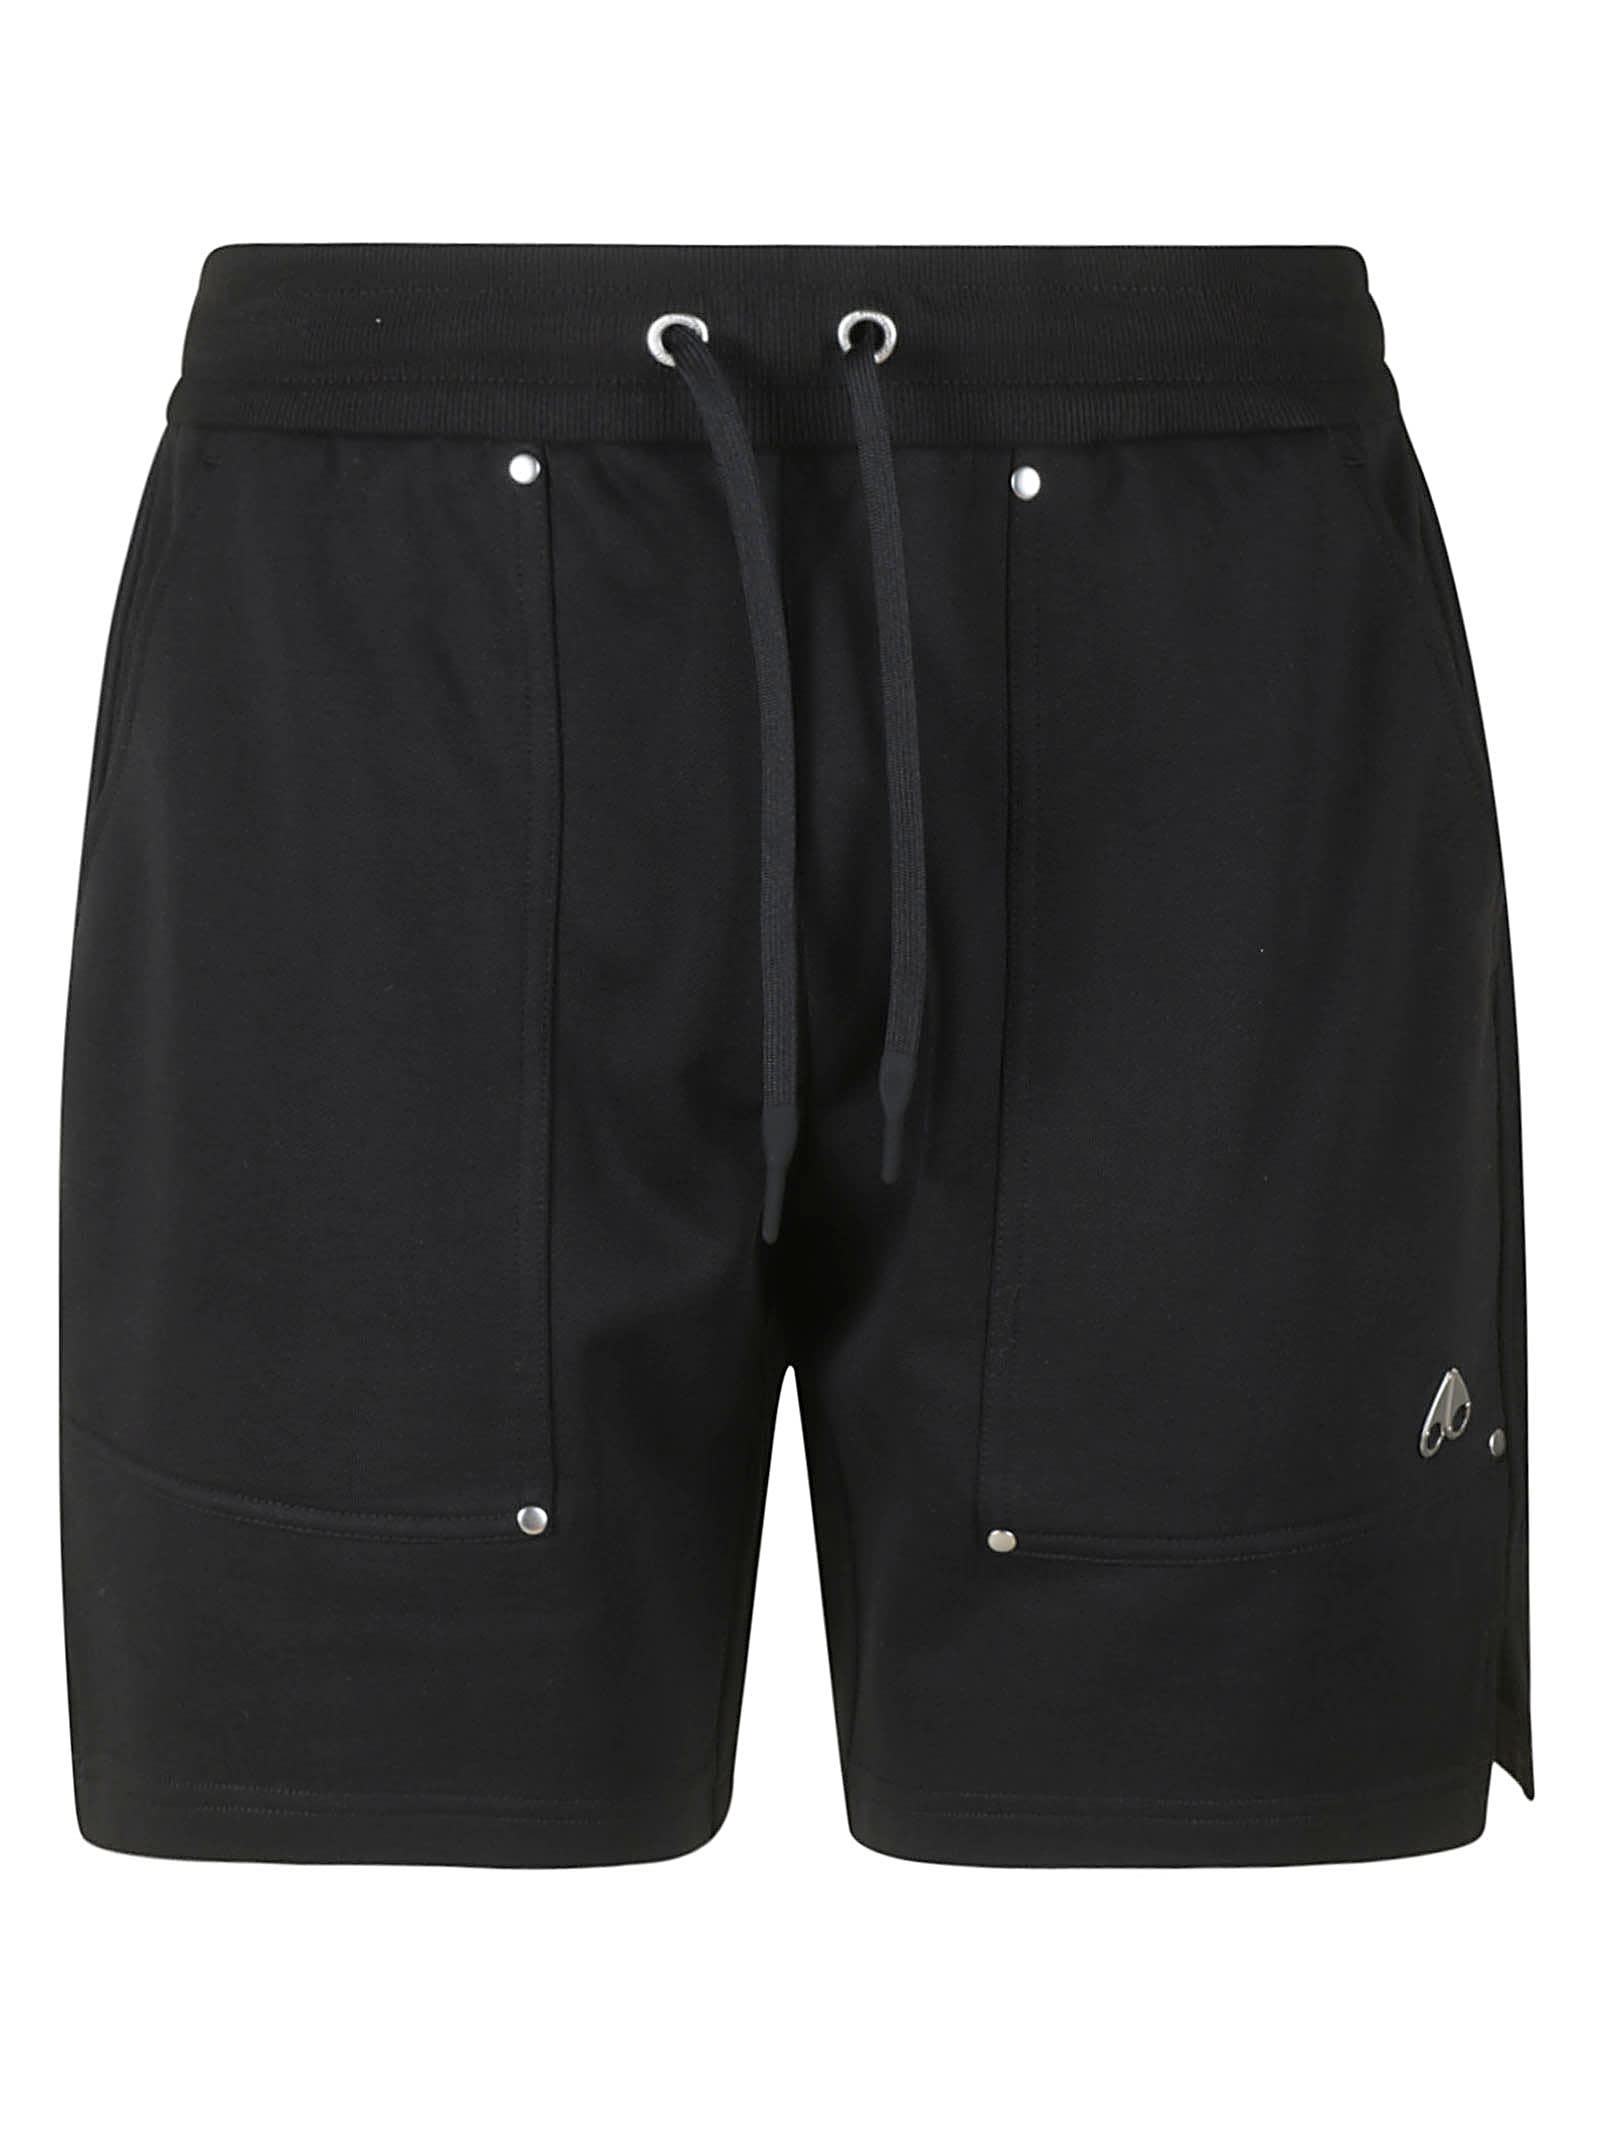 MOOSE KNUCKLES GIFFORD SHORTS